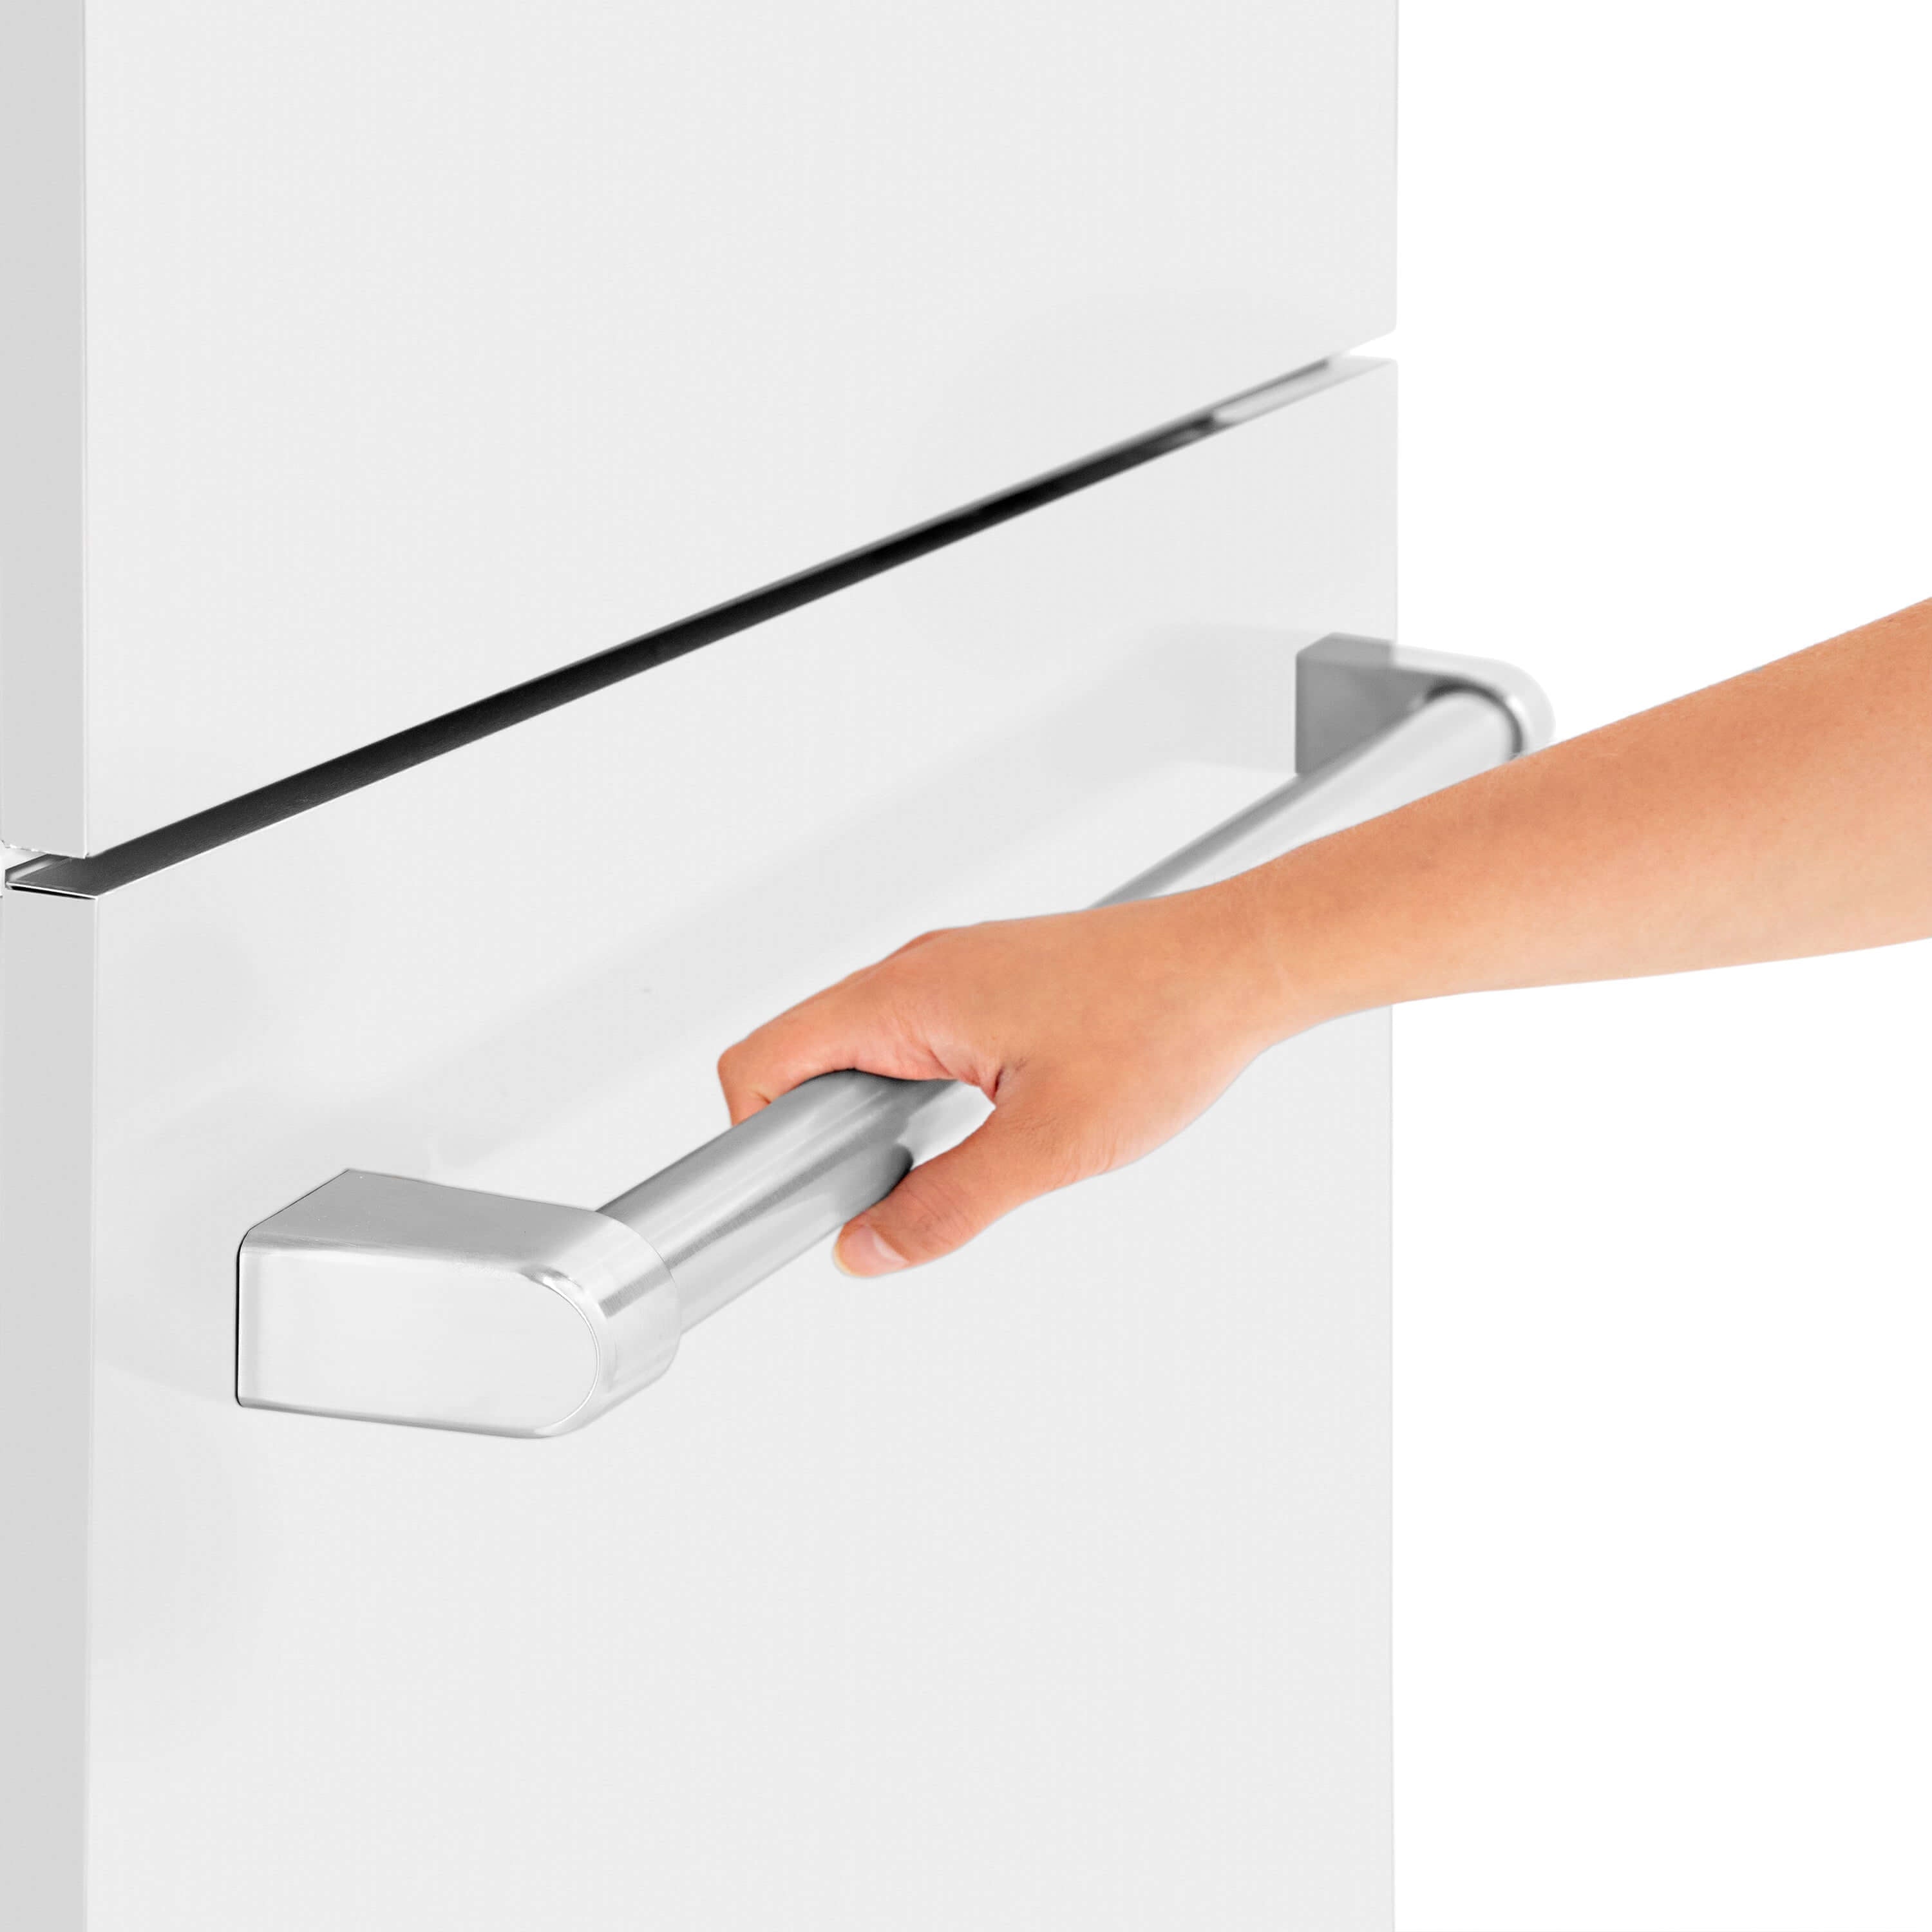 Panels & Handles Only- ZLINE 30 in. Refrigerator Panels in White Matte for a 30 in. Built-in Refrigerator (RPBIV-WM-30)